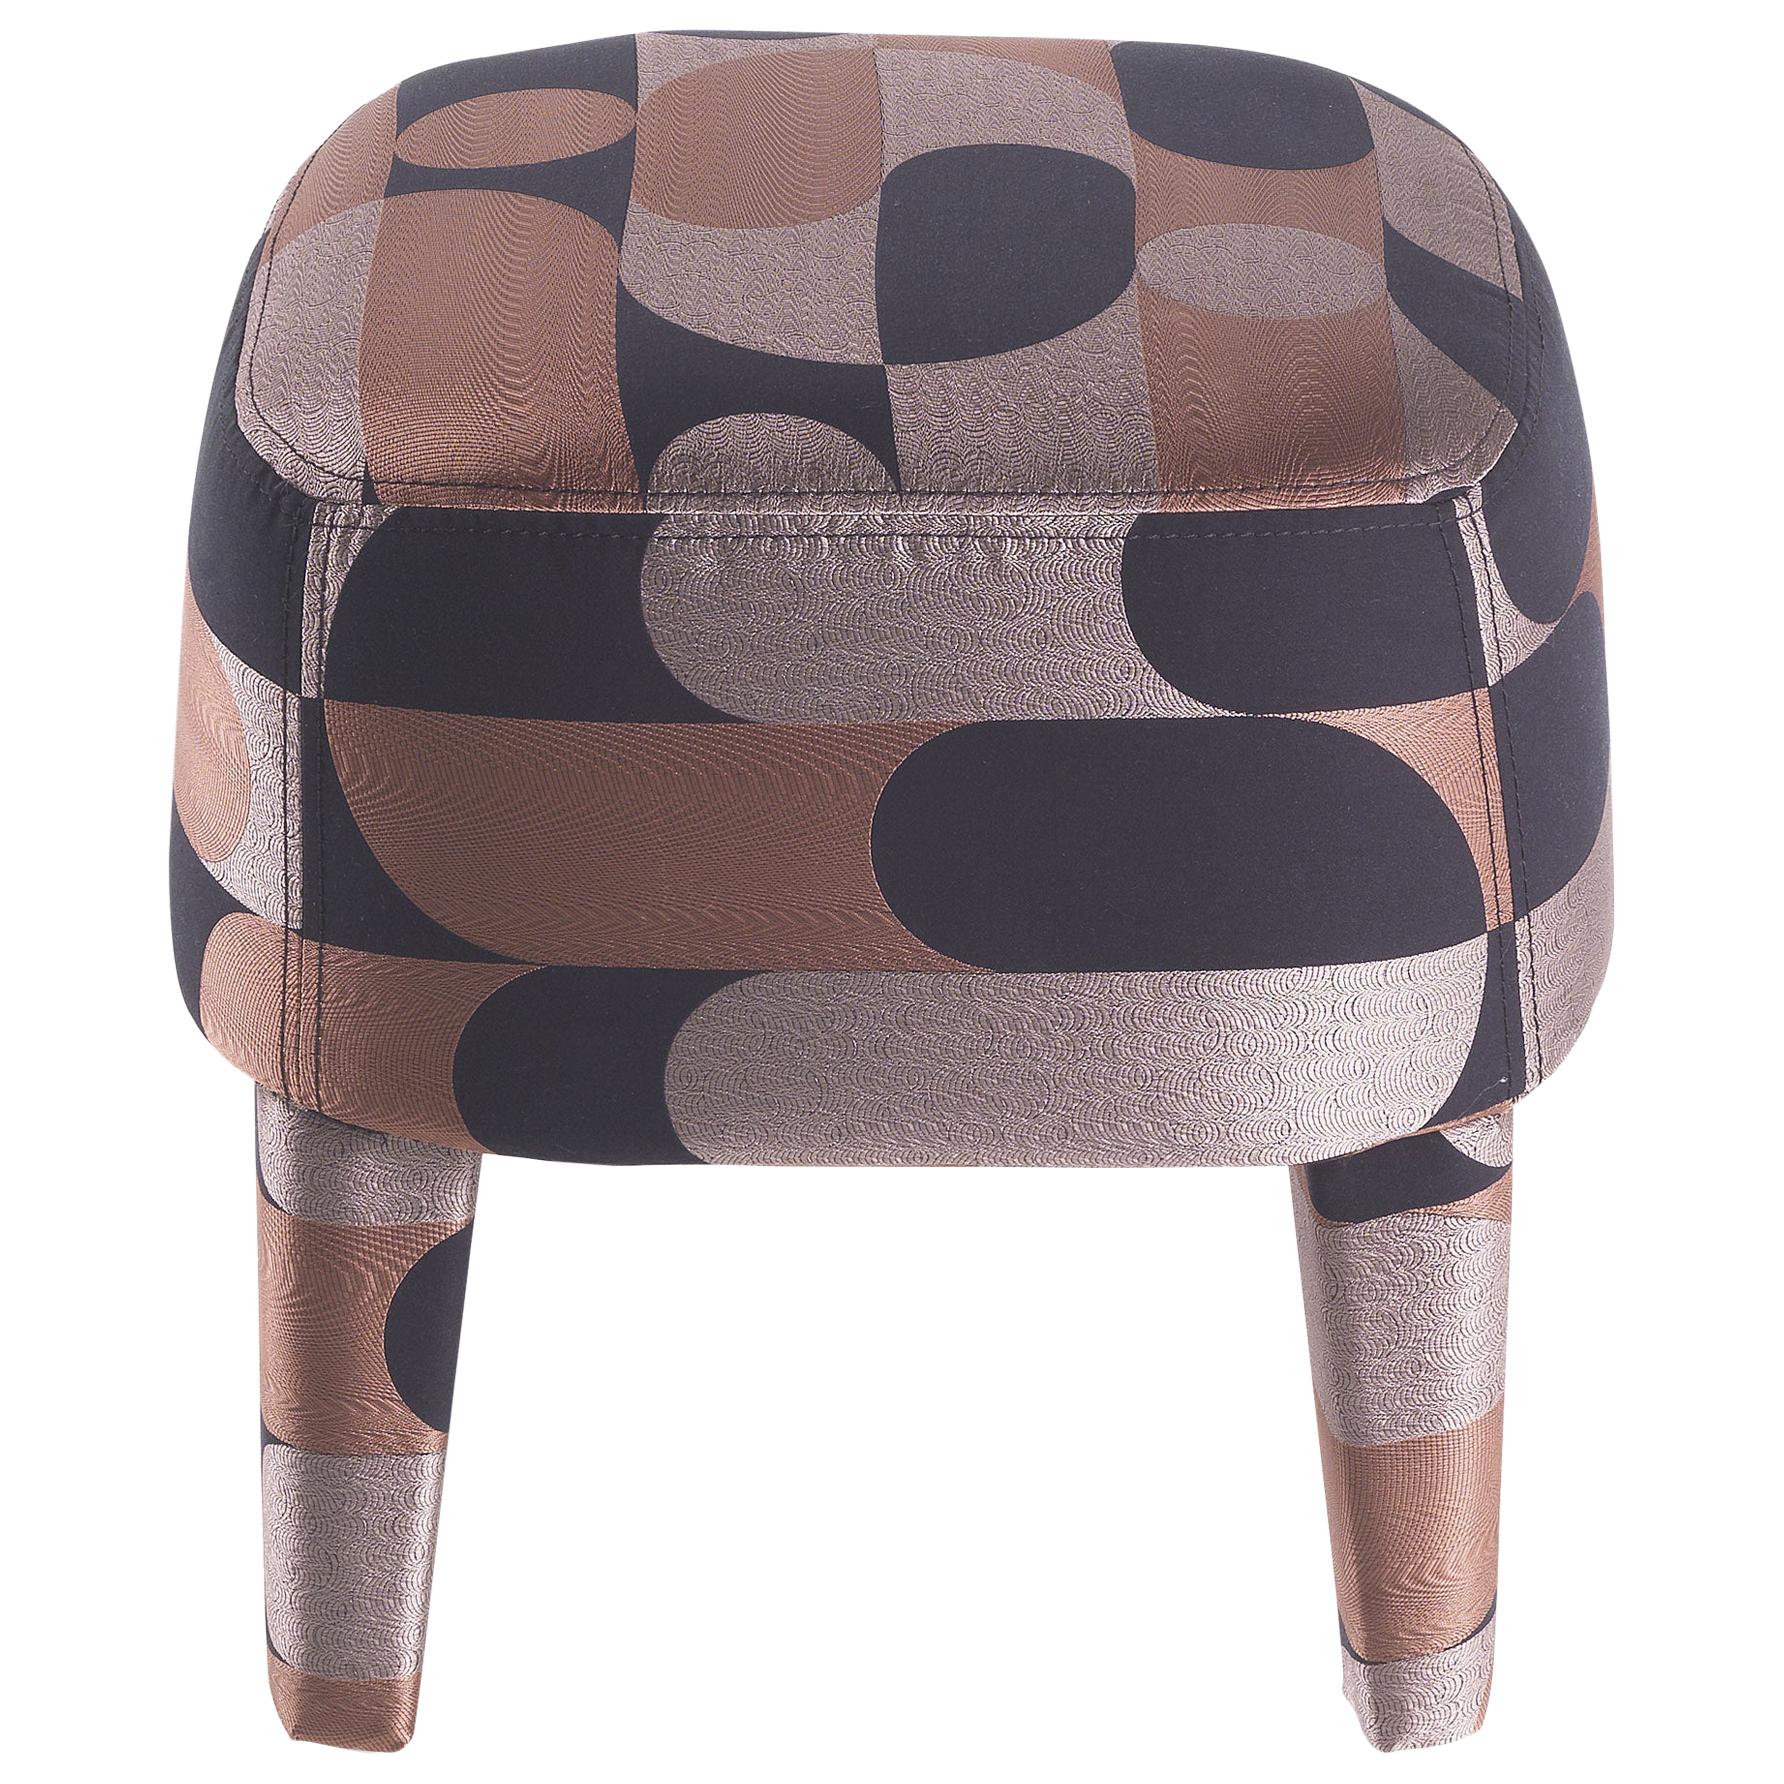 21st Century Mini Pouf in Fifties Pink Jacquard by Gianfranco Ferré Home